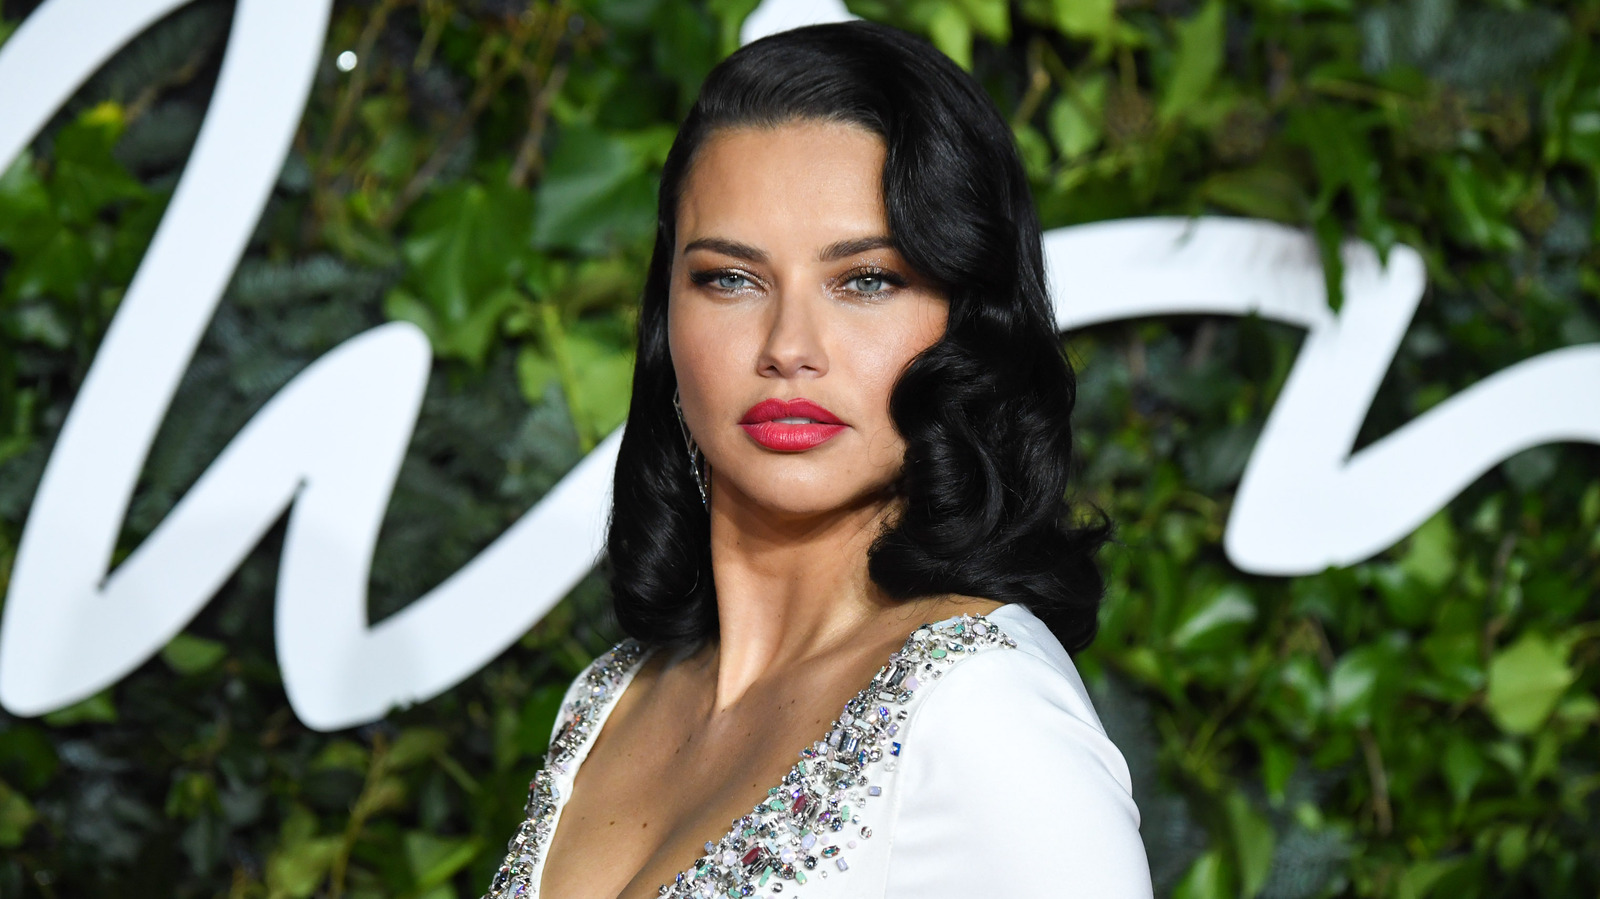 heres what adriana lima looks like without makeup